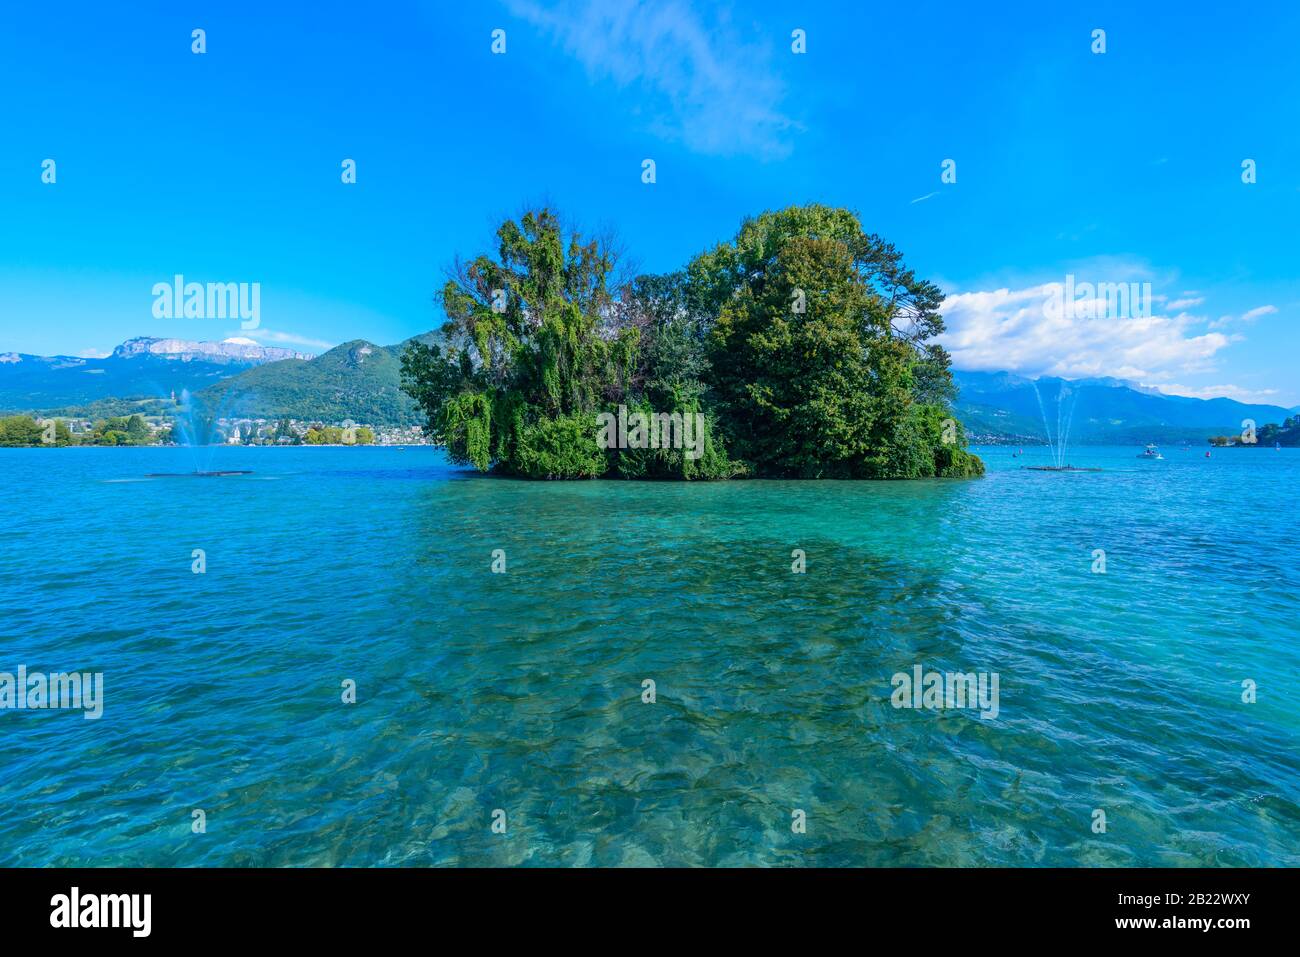 A small green island - Island of Swans (L'île des Cygnes) on Lake Annecy, one of the largest lakes in France known as the cleanest lake in Europe. Stock Photo